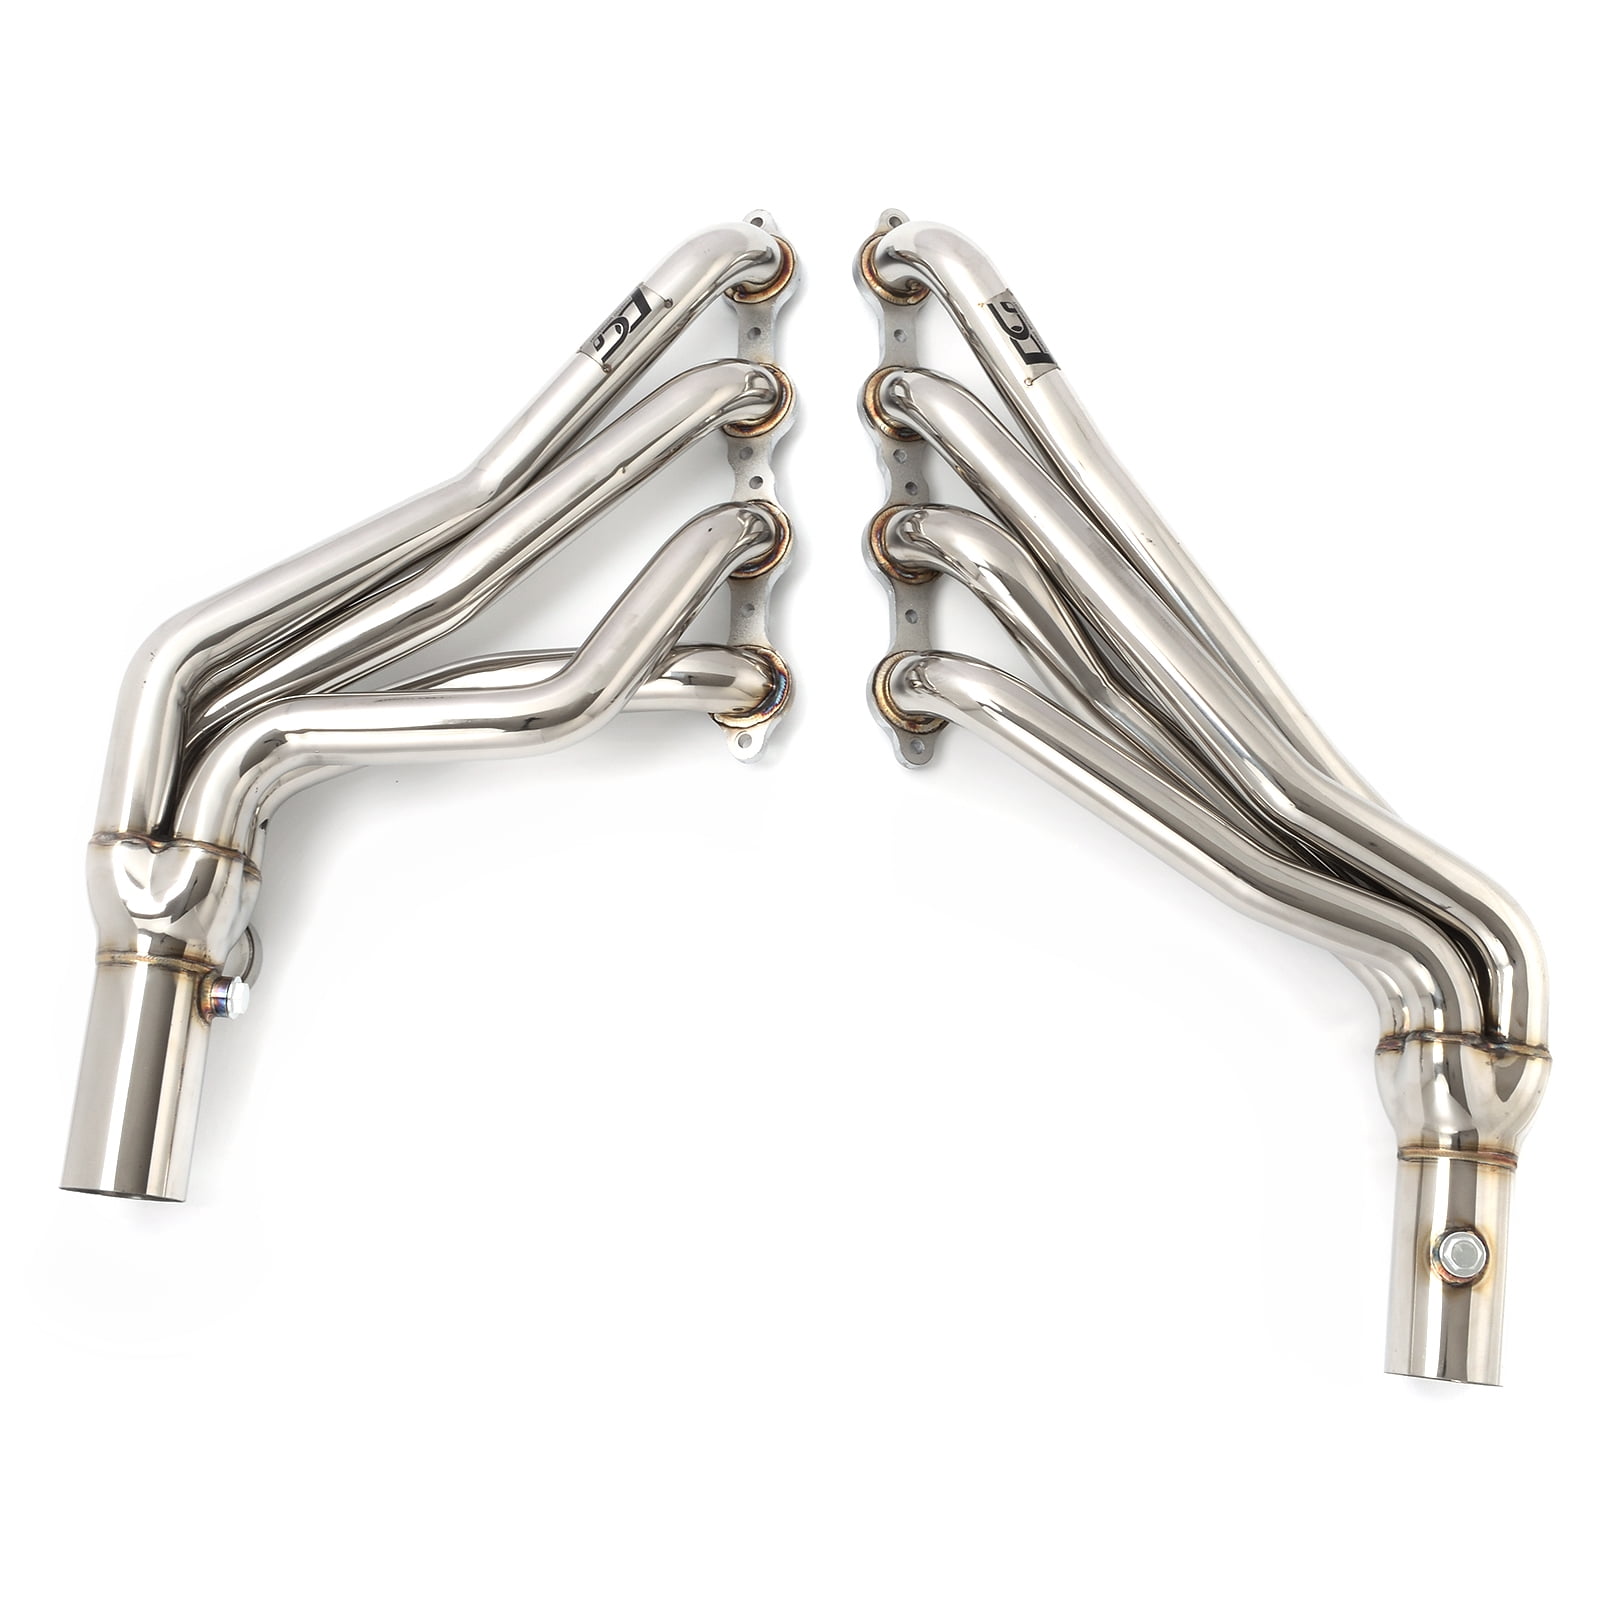 Exhaust Headers 1-5/8 in 304 Stainless Steel Polished Finish for 2002-2013 Silverado Sierra Suburban Tahoe Yukon Escalade 4.8L 5.3L 6.0L 6.2L V8 